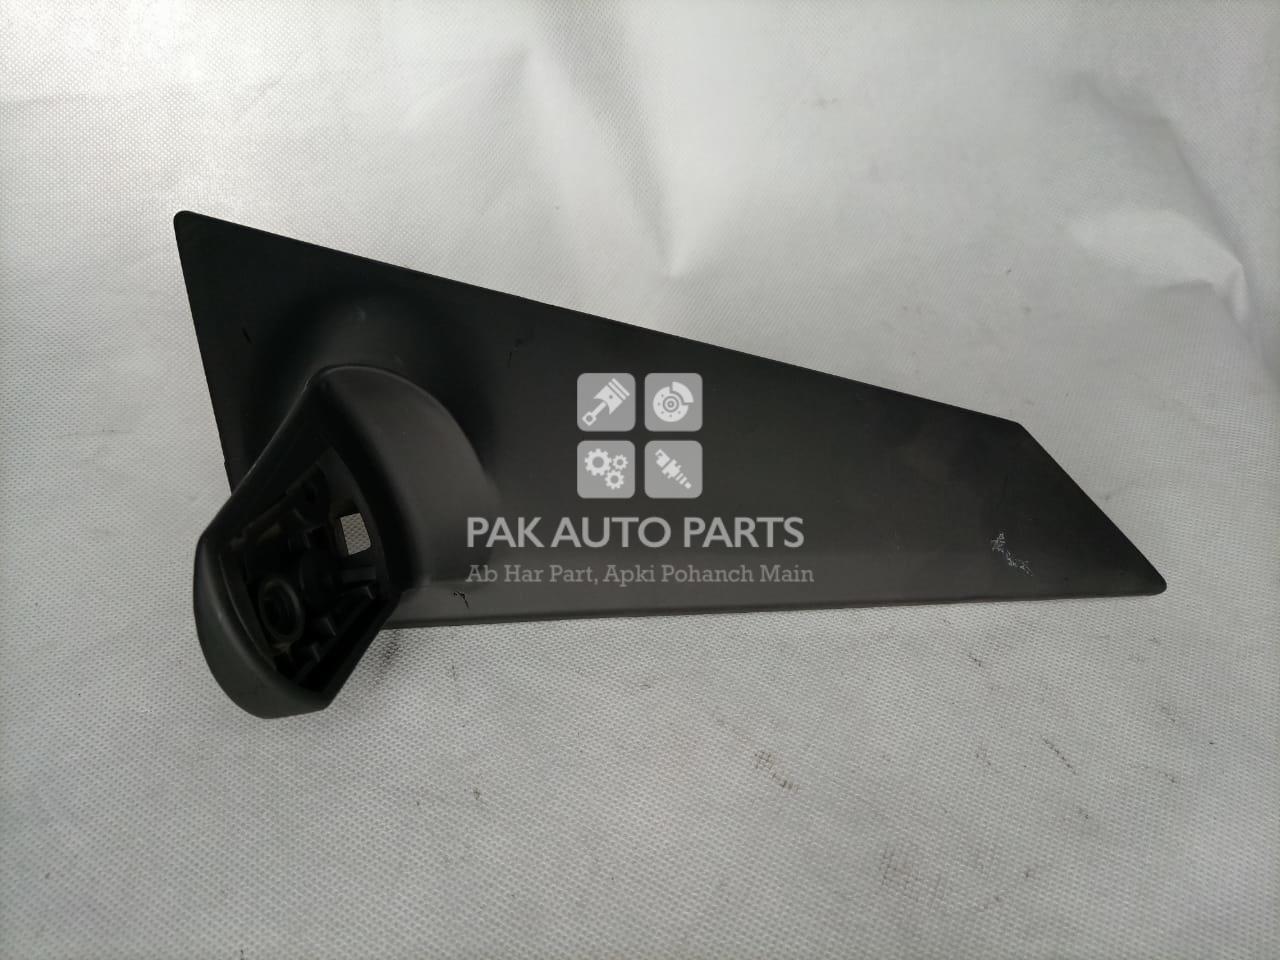 Picture of Toyota Prius Universal Side Mirror Bass